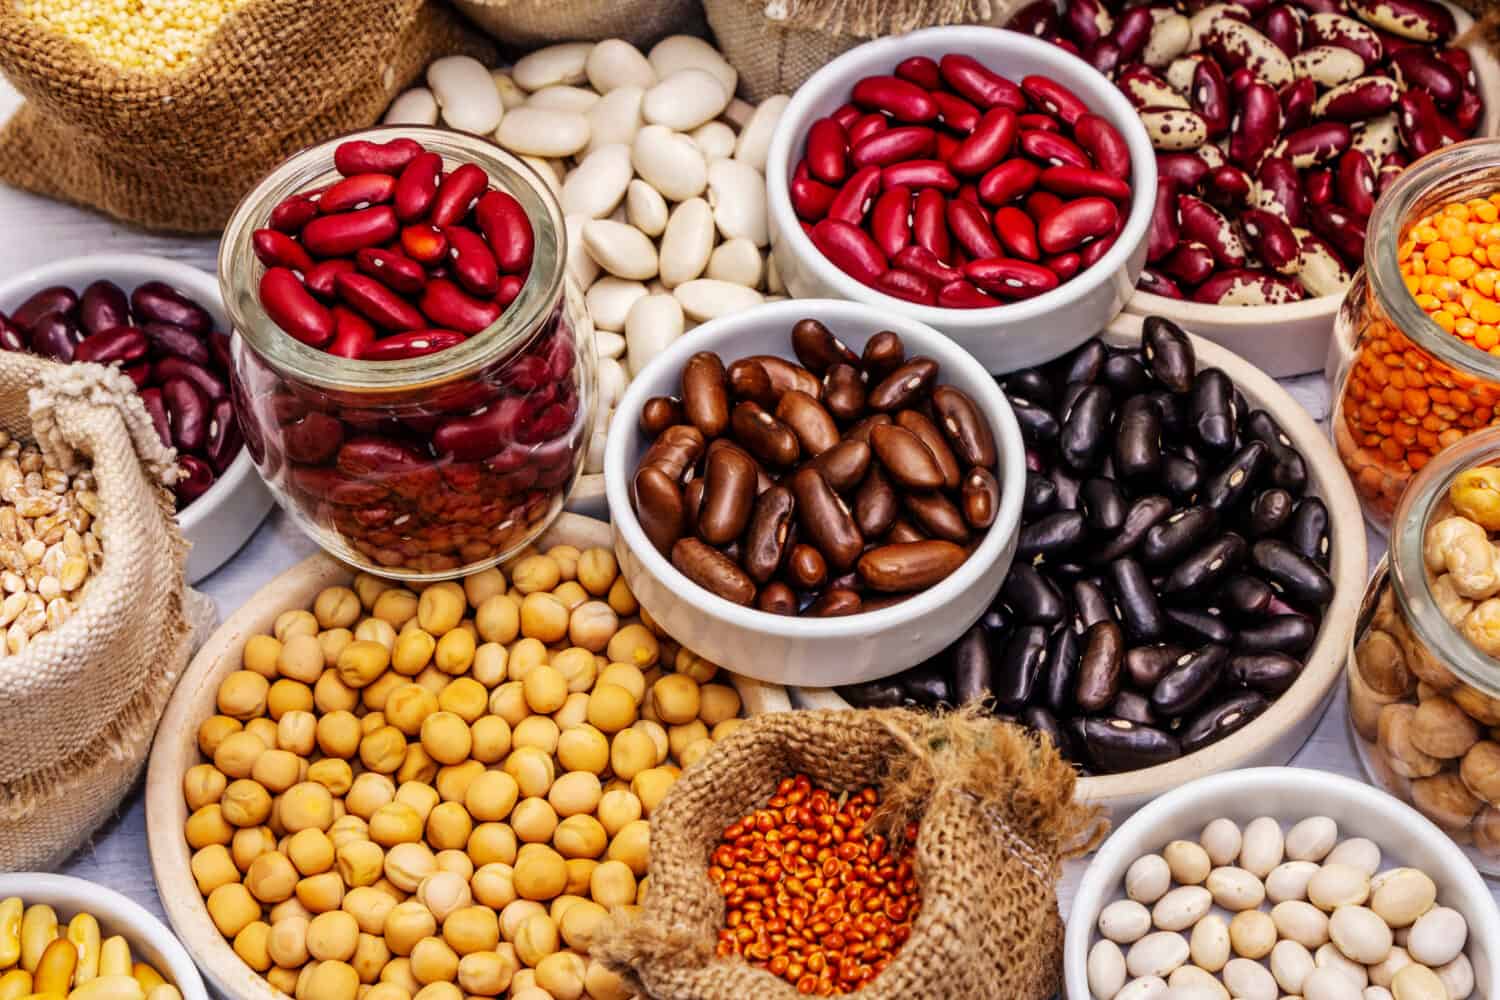 Assorted different types of beans and cereals grains. Set of indispensable sources of protein for a healthy lifestyle. White wooden boards background, close up